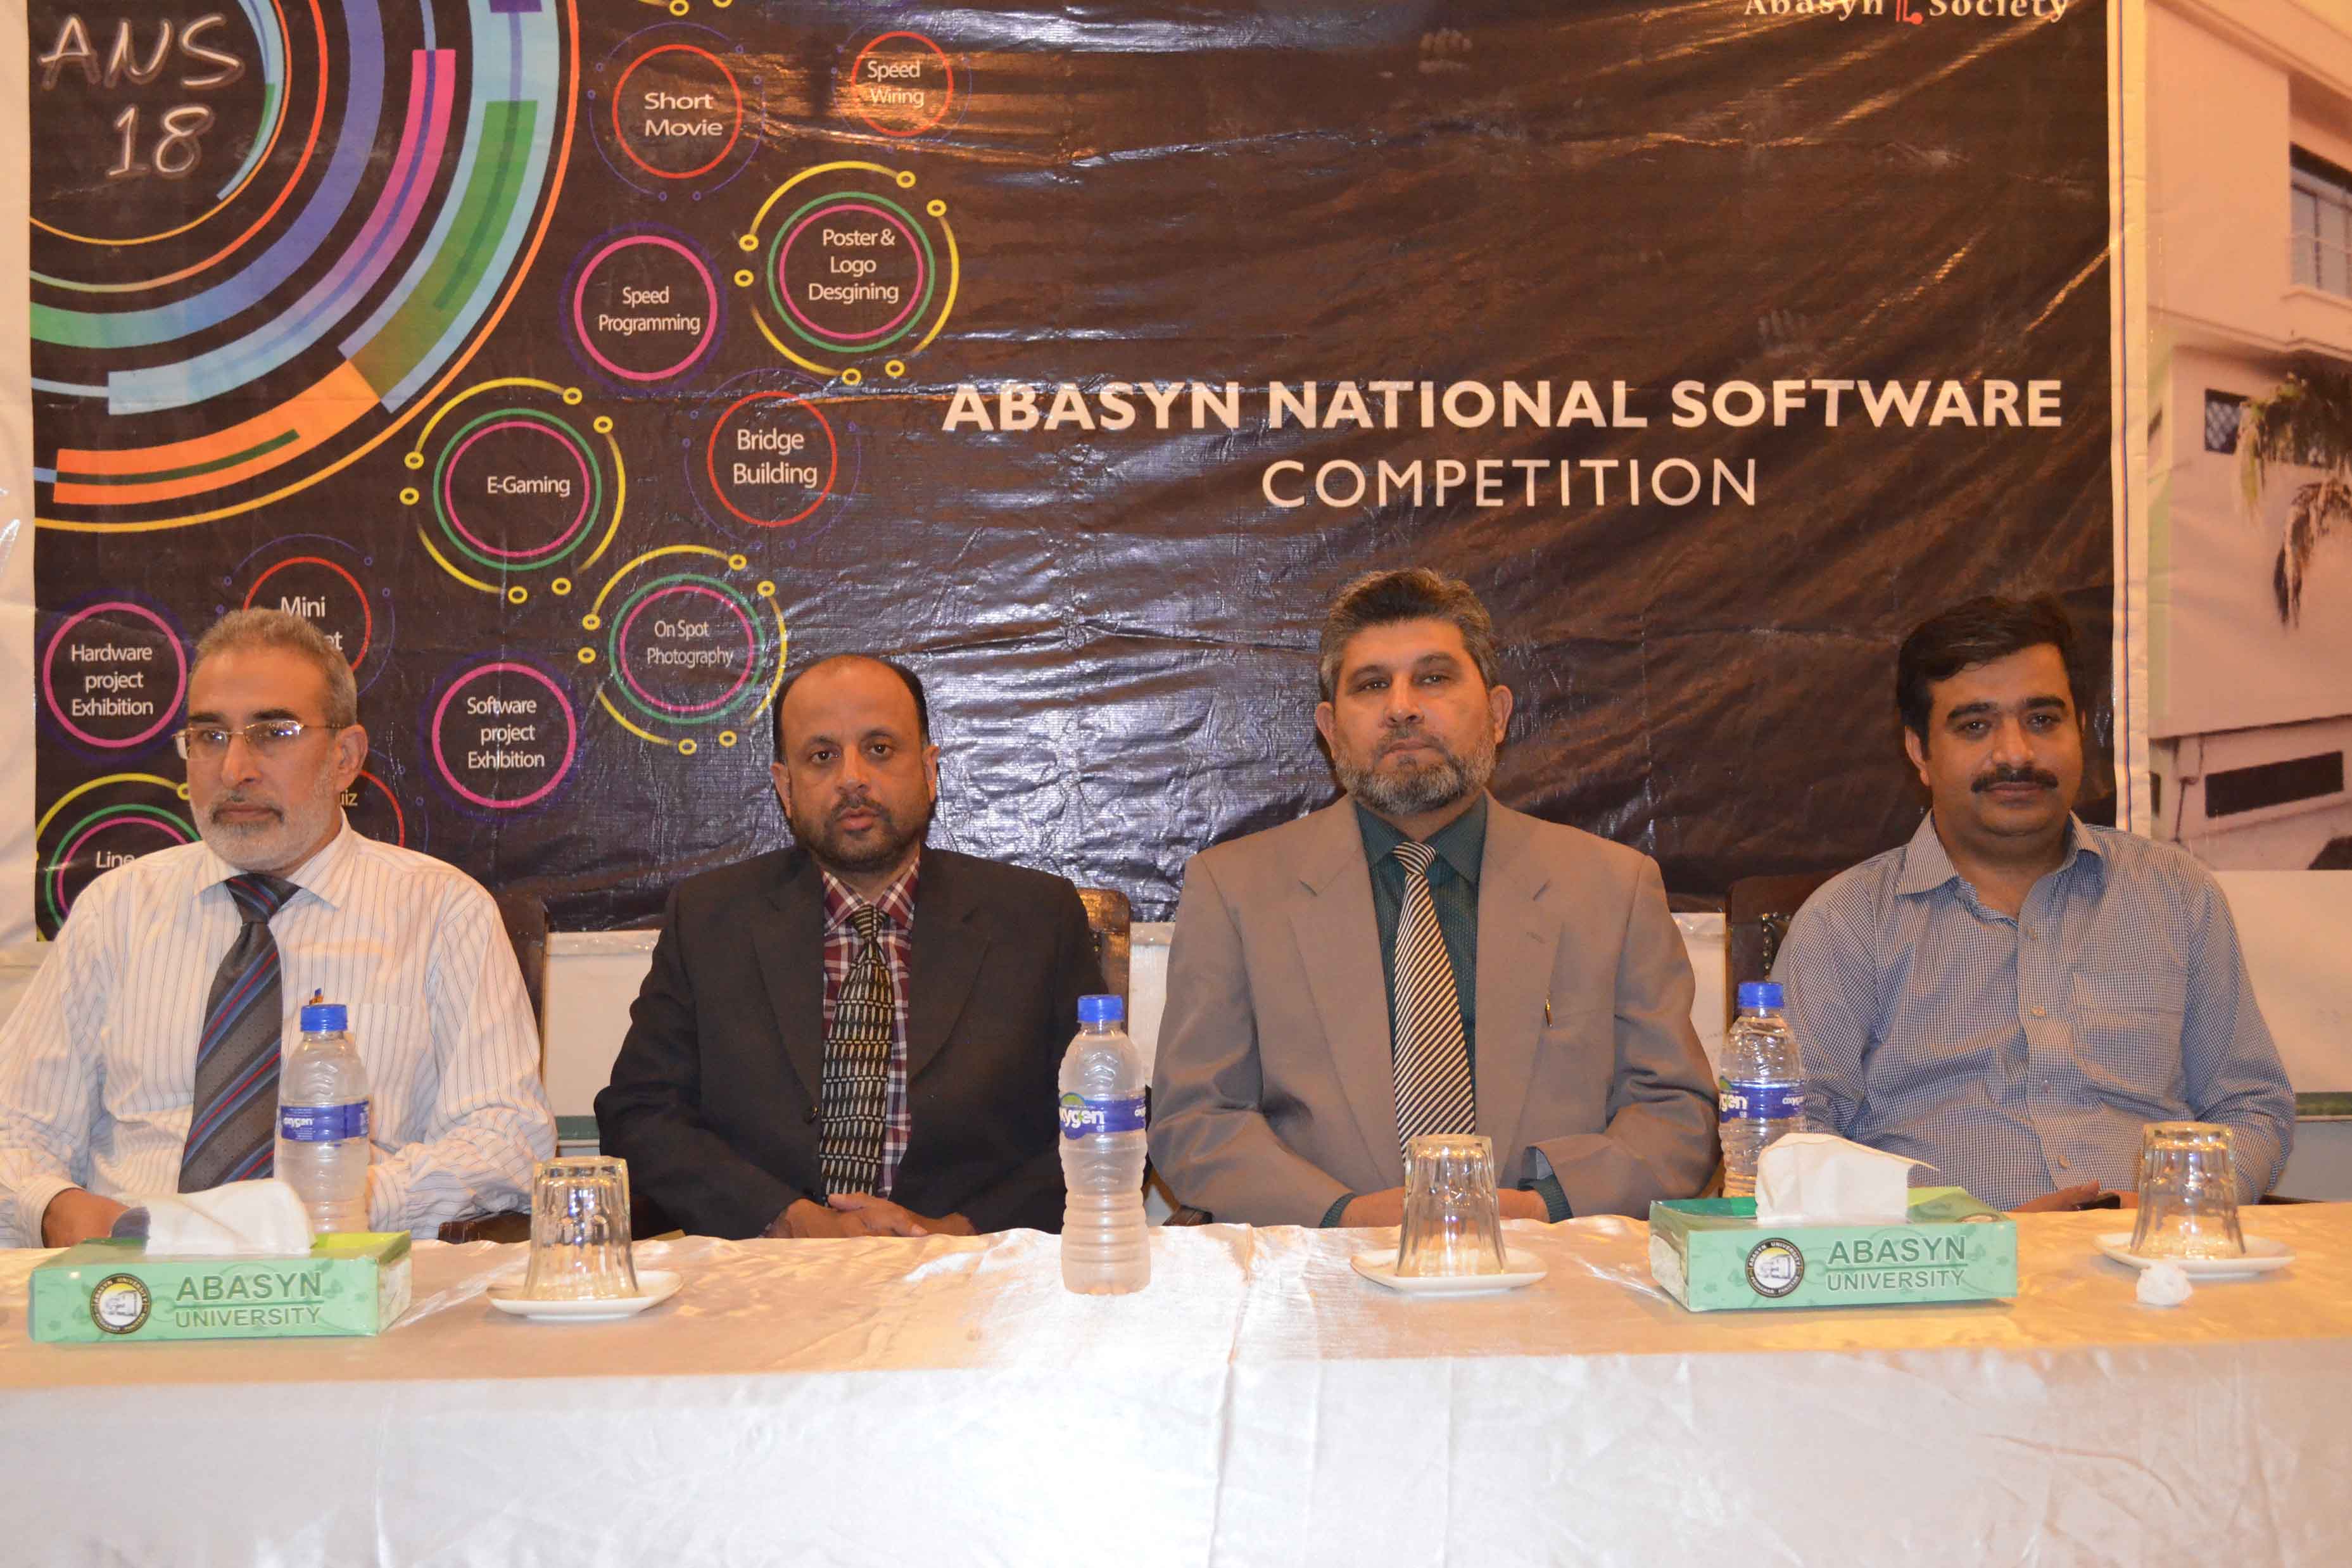 Abasyn National Software Competition 2018